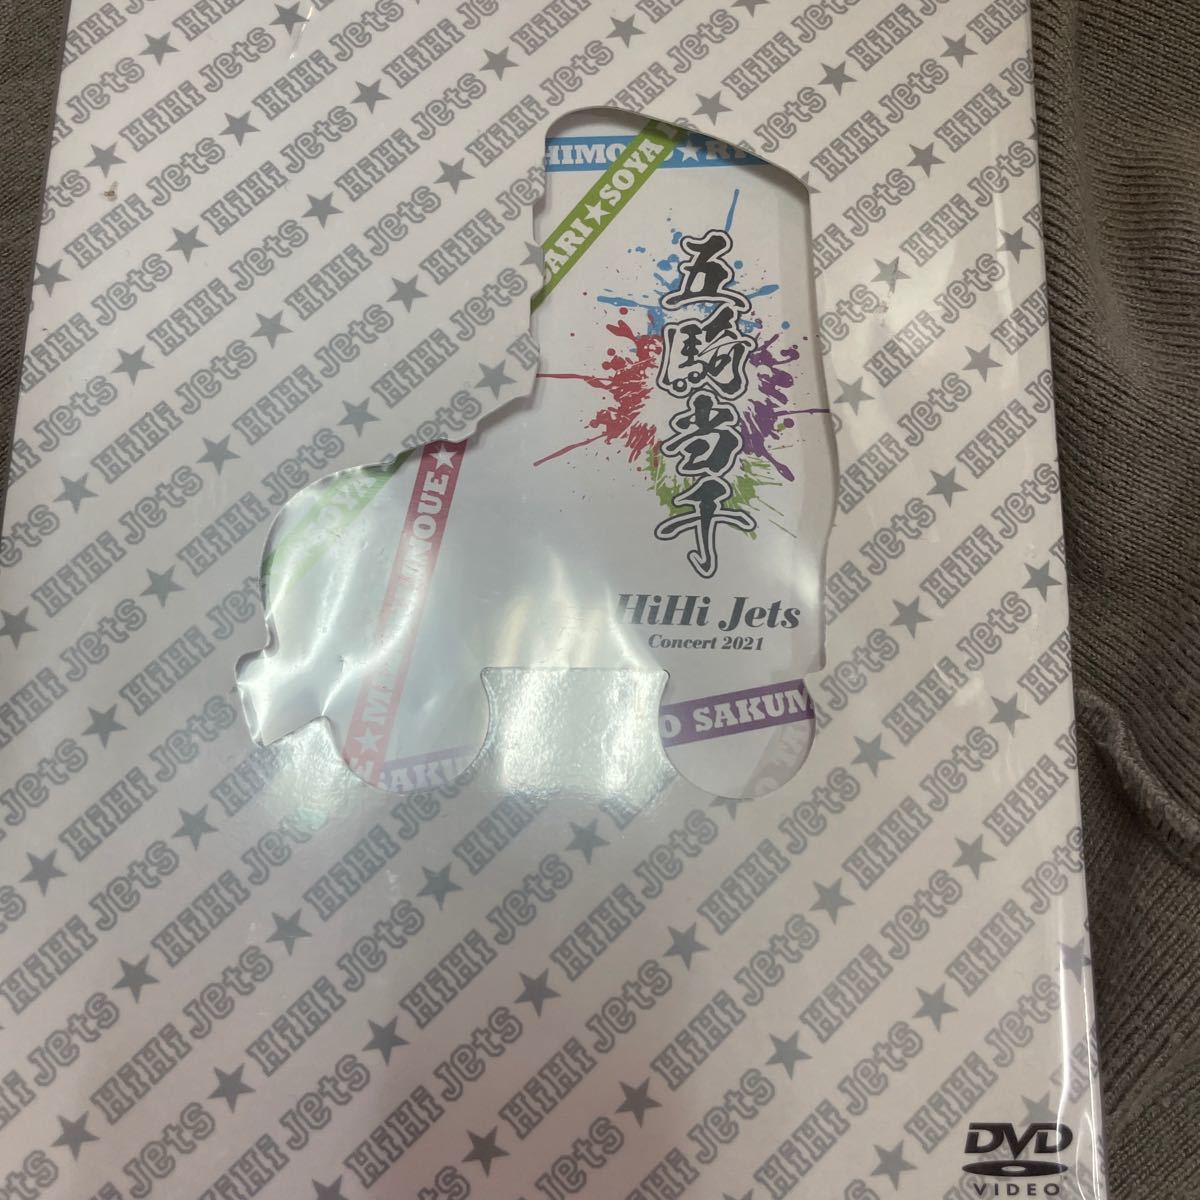 HiHi Jets Concert  ～五騎当千～ dvd｜PayPayフリマ